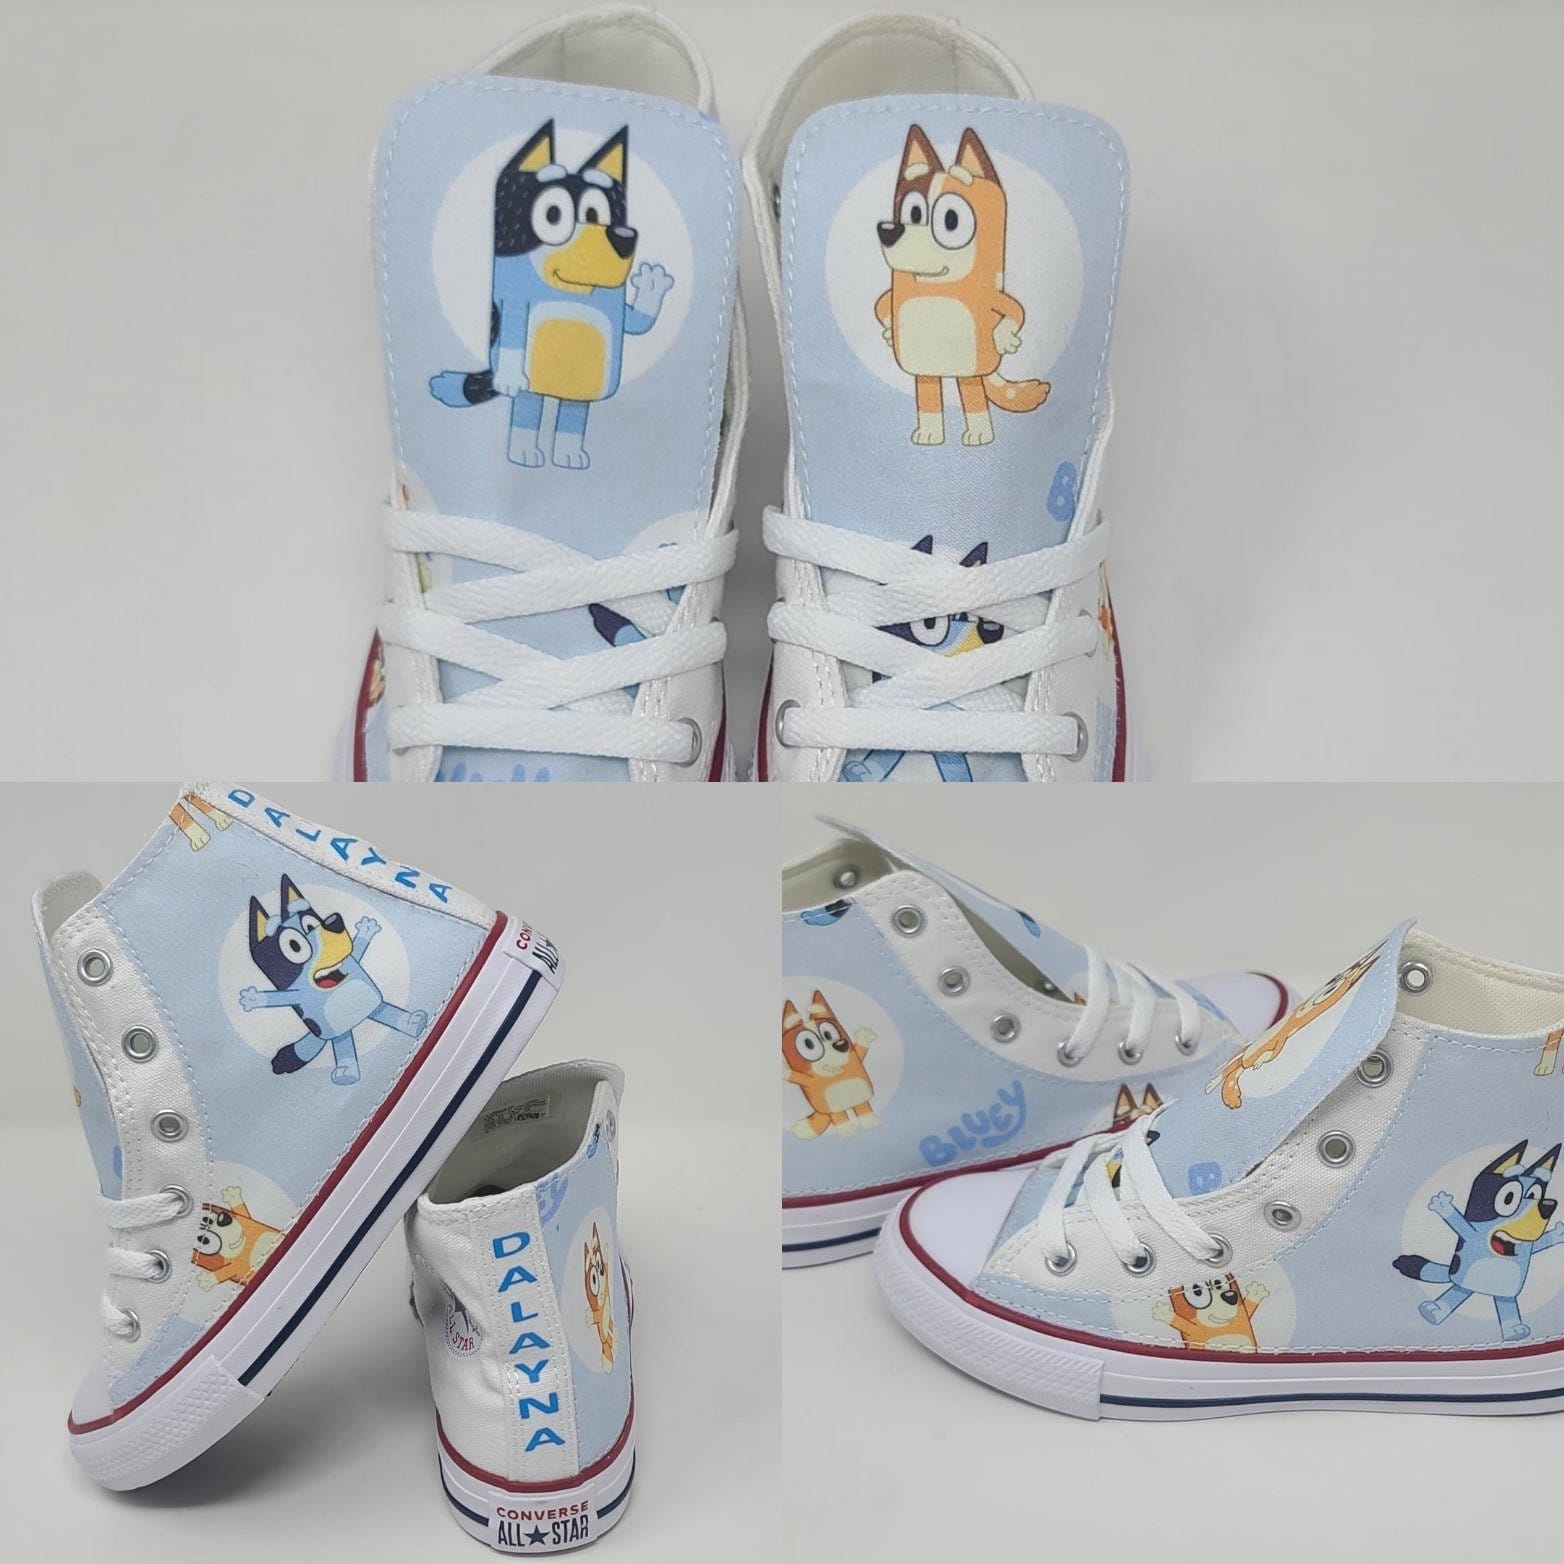 Handmade Bluey Bingo Converse Shoes Birthday sneaker white Shoe Personalized Toddler Unisex Athletic Casual footwear licensed fabric